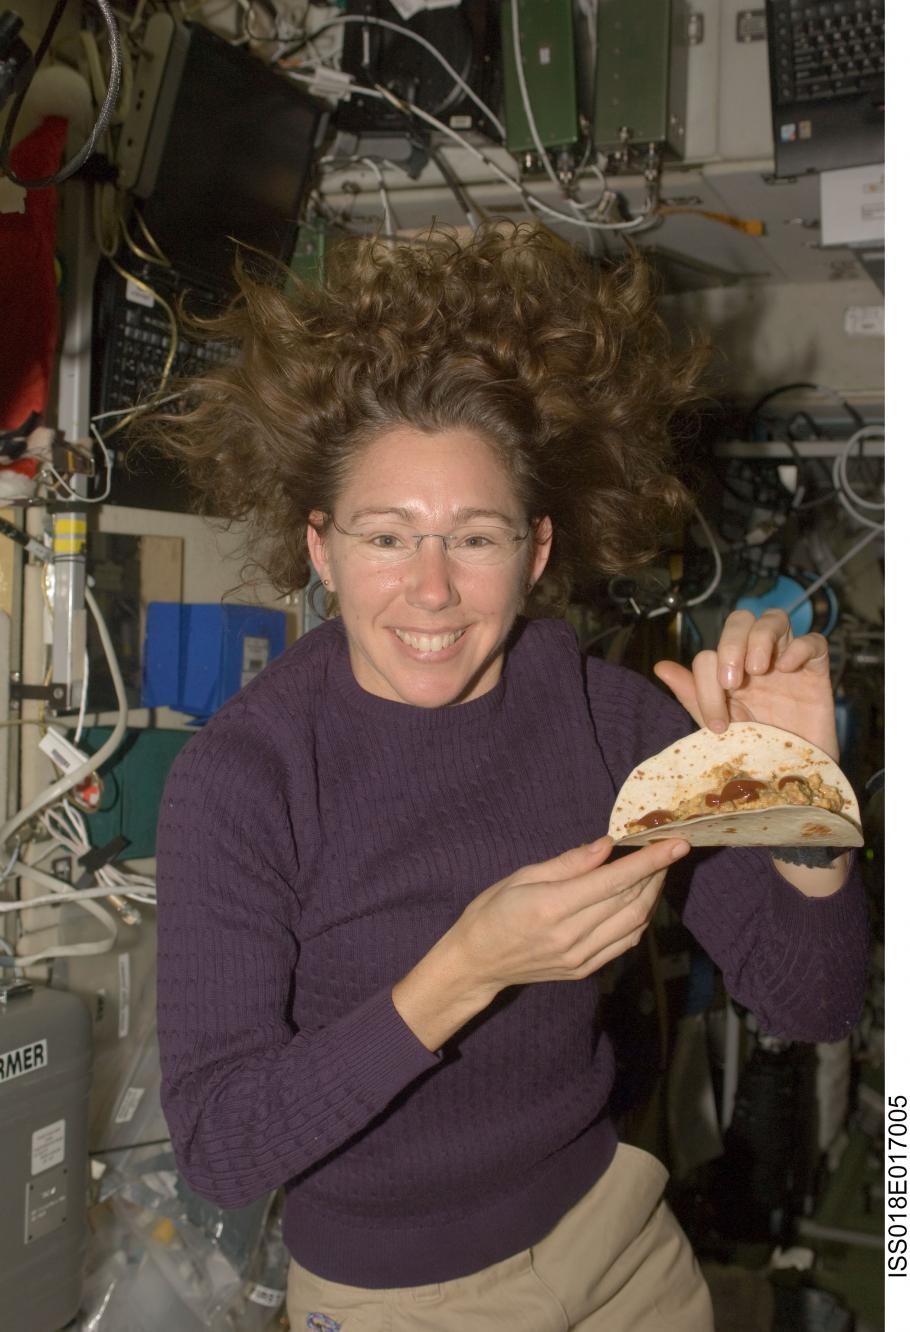 Astronaut Sandra Magnus poses for a photo with a tortilla sandwich which she prepared aboard the ISS.